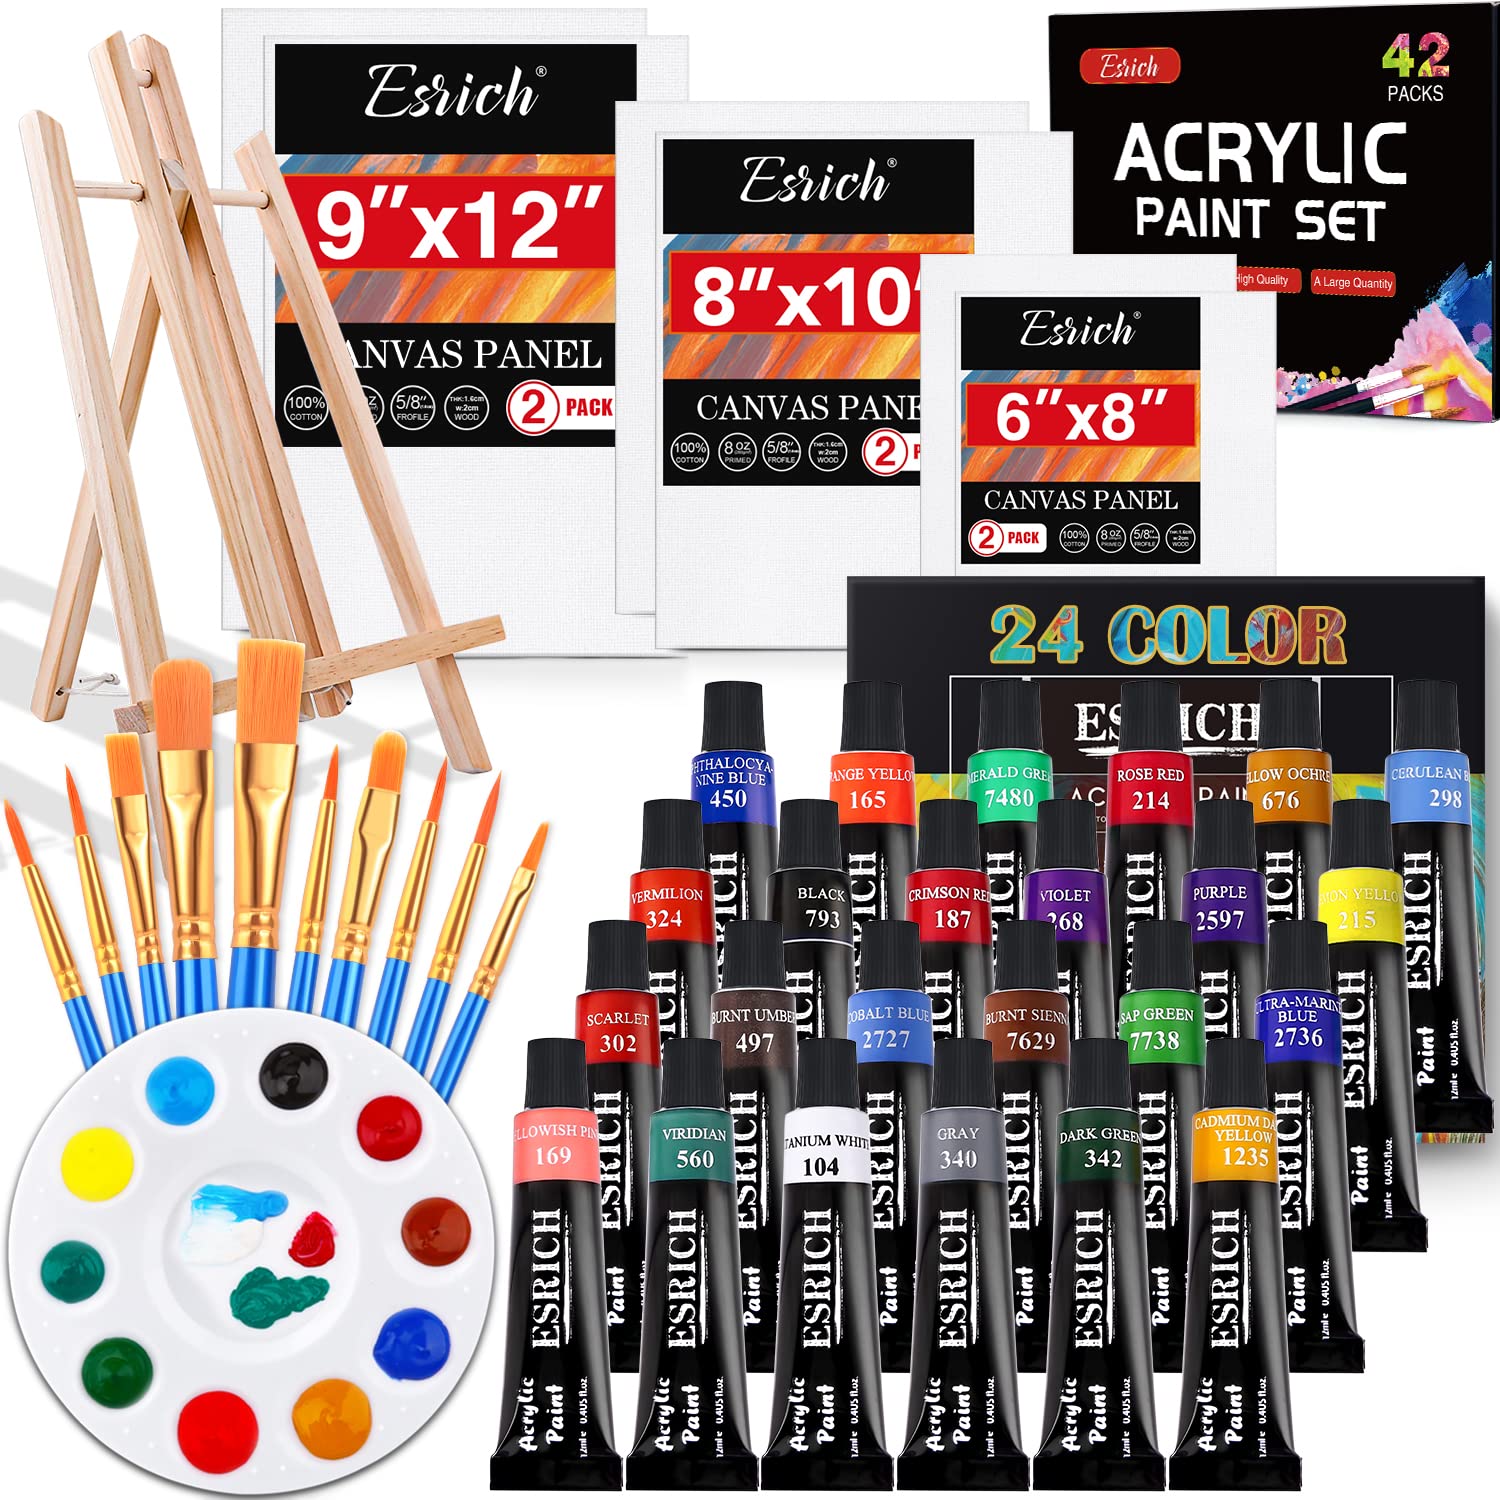 Acrylic Paint Set for Adults and Kids - Art Painting Supplies Kit with  Acrylic Tubes, Canvas Panels, Tabletop Easel & More for Professional and